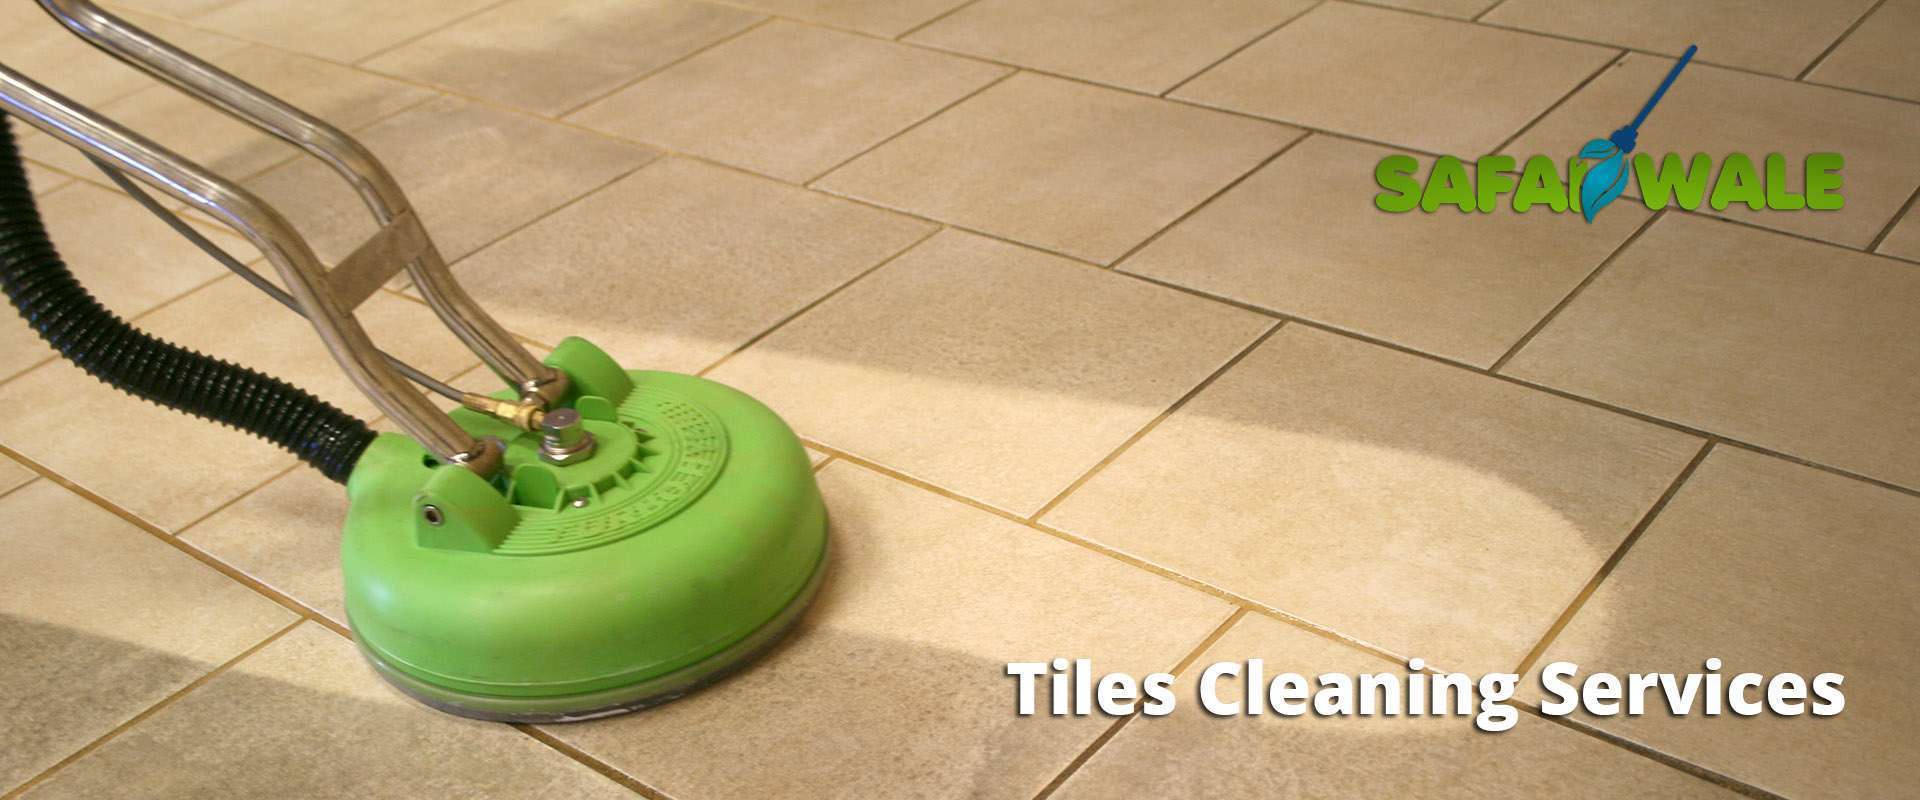 Tiles Cleaning Services In Delhi NCR